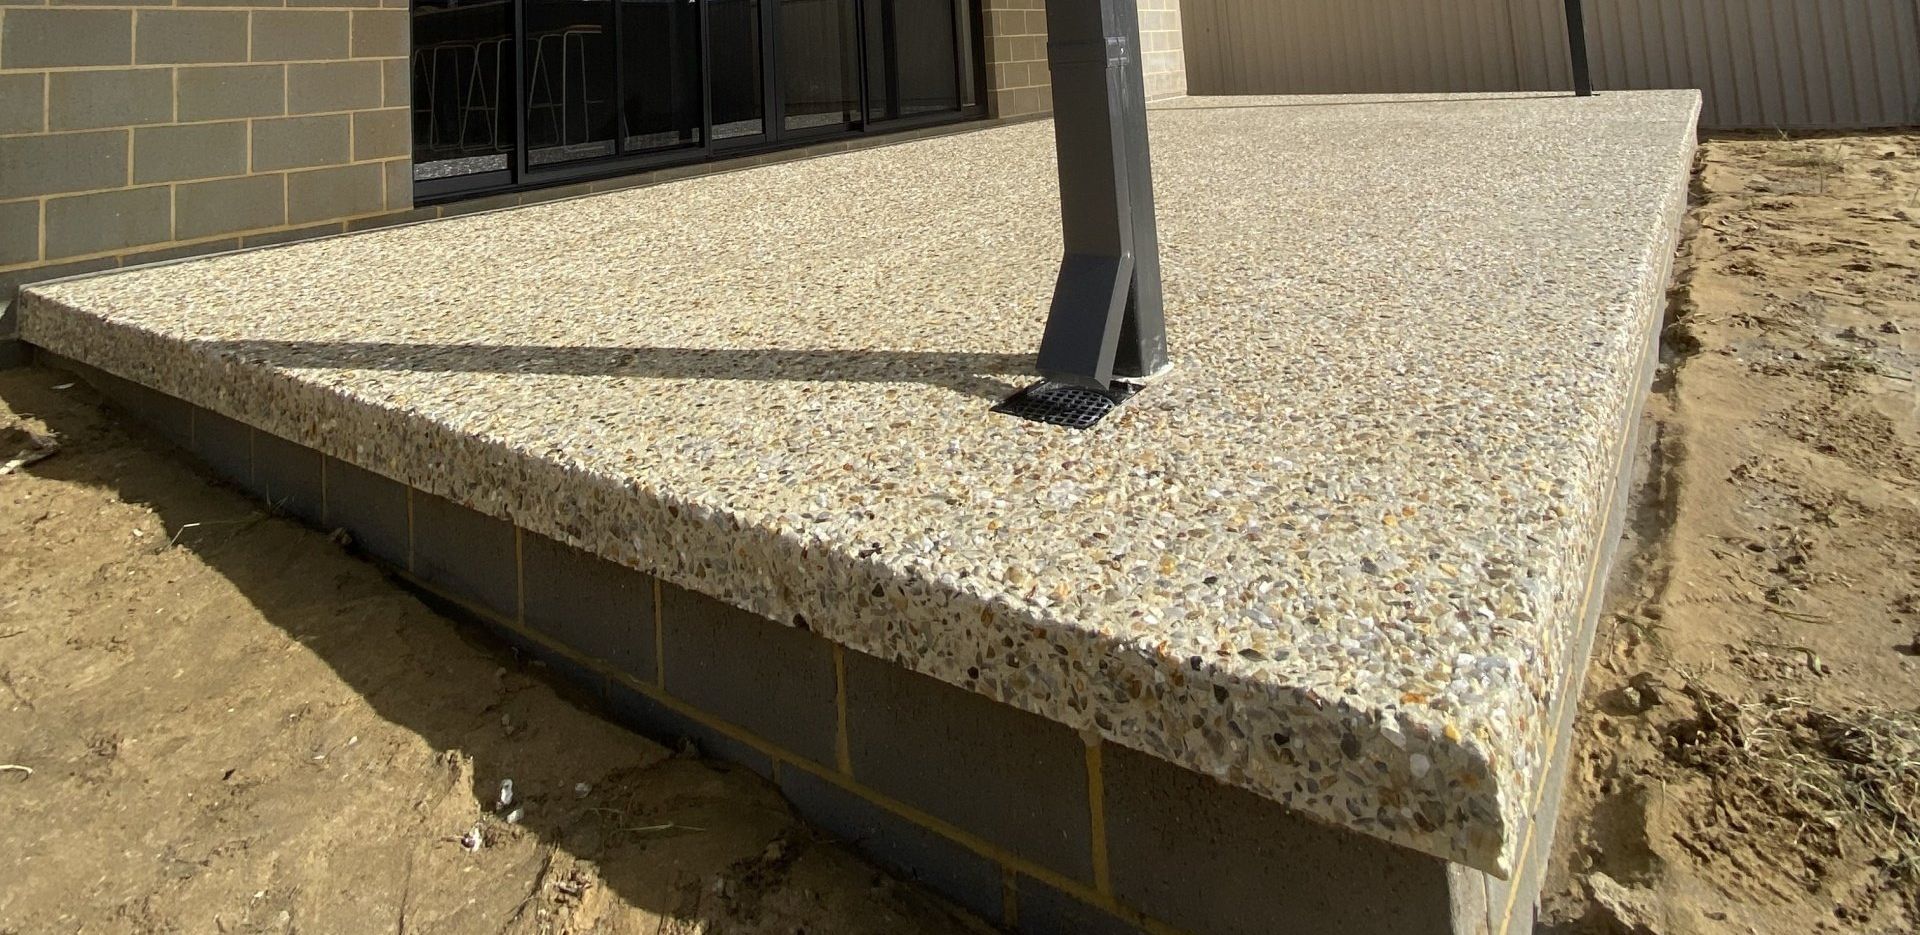 Exposed Aggregate patio flooring with over hang design